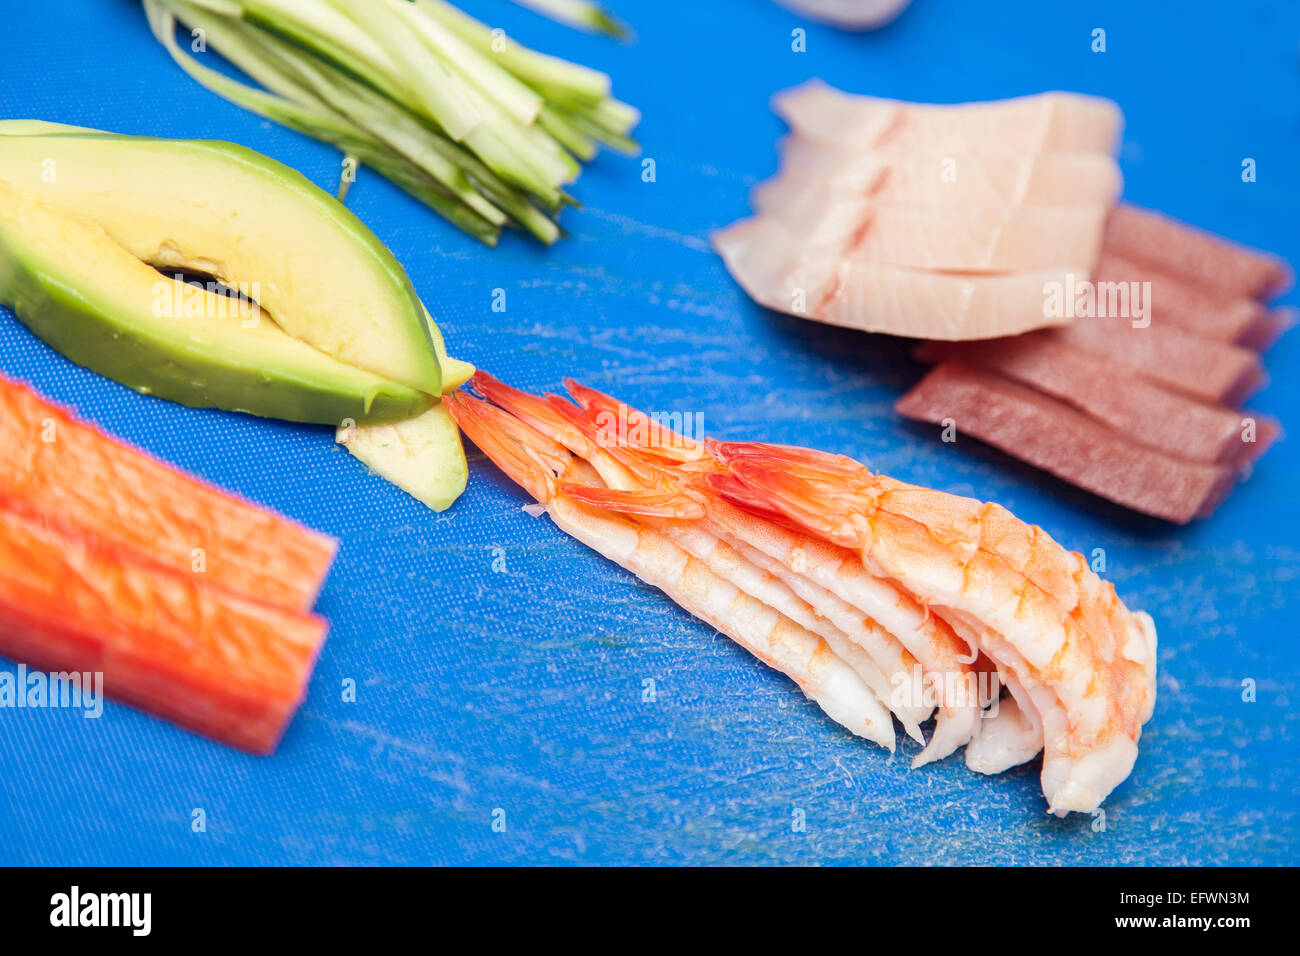 Japanese seafood ready for sushi on blue chopped board Stock Photo